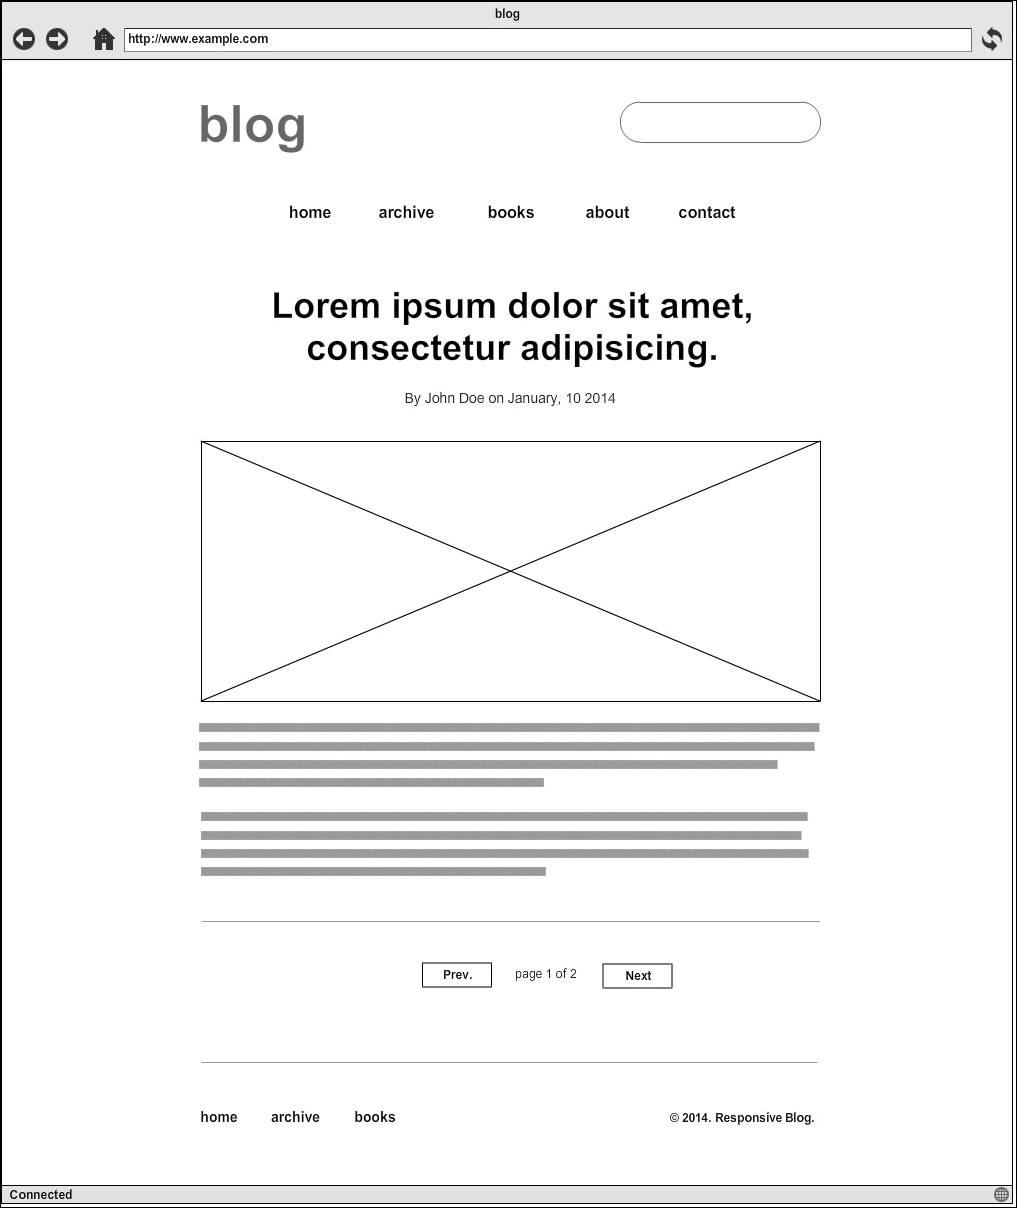 Examining the blog's wireframe